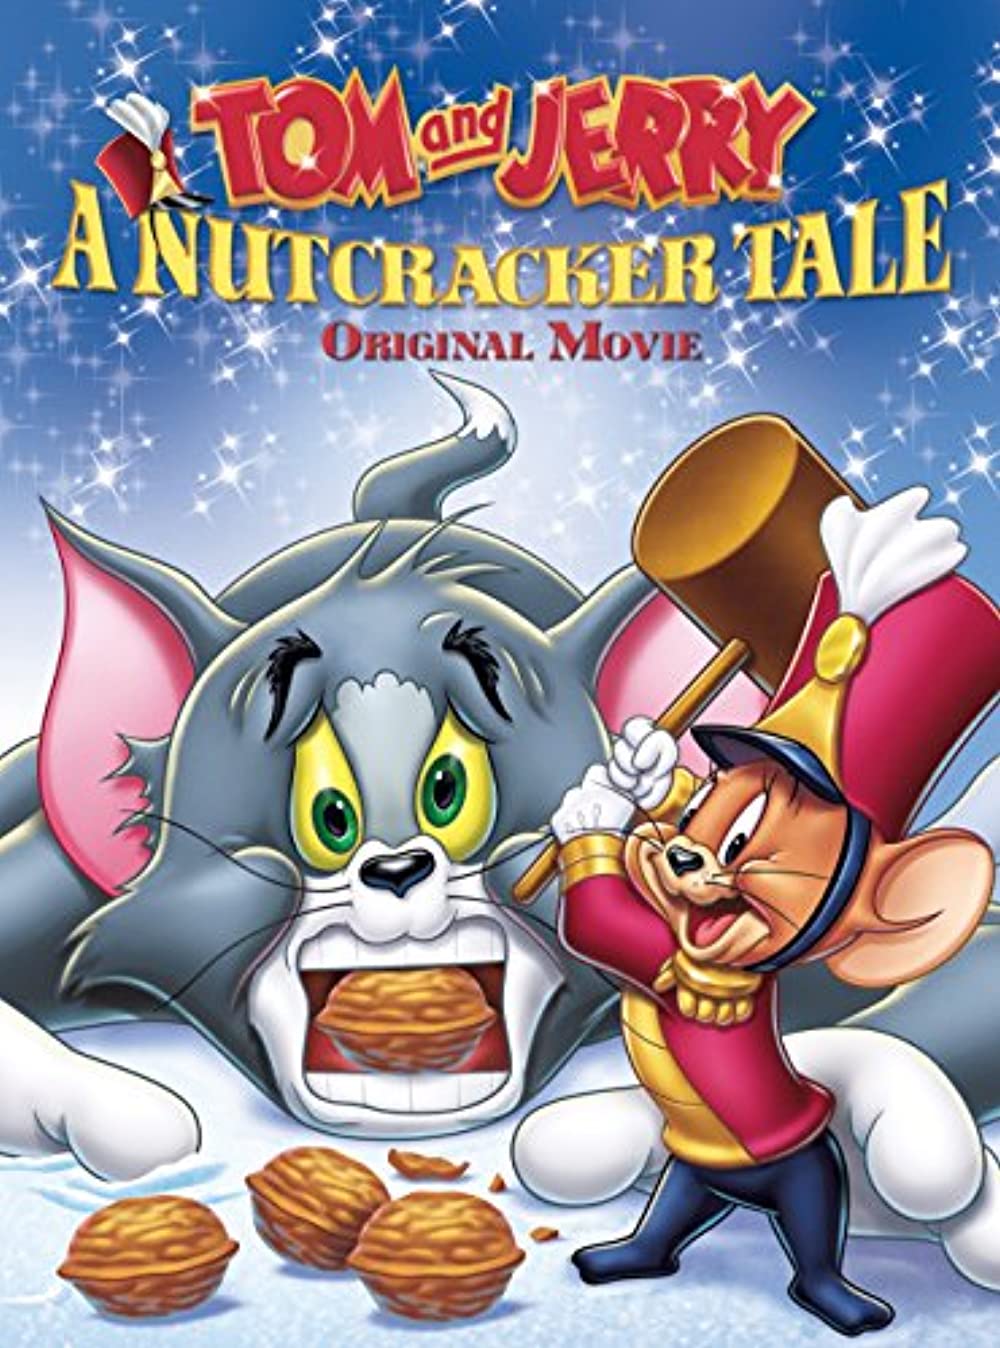 Download Tom and Jerry: A Nutcracker Tale Movie | Watch Tom And Jerry: A Nutcracker Tale Hd, Dvd, Divx